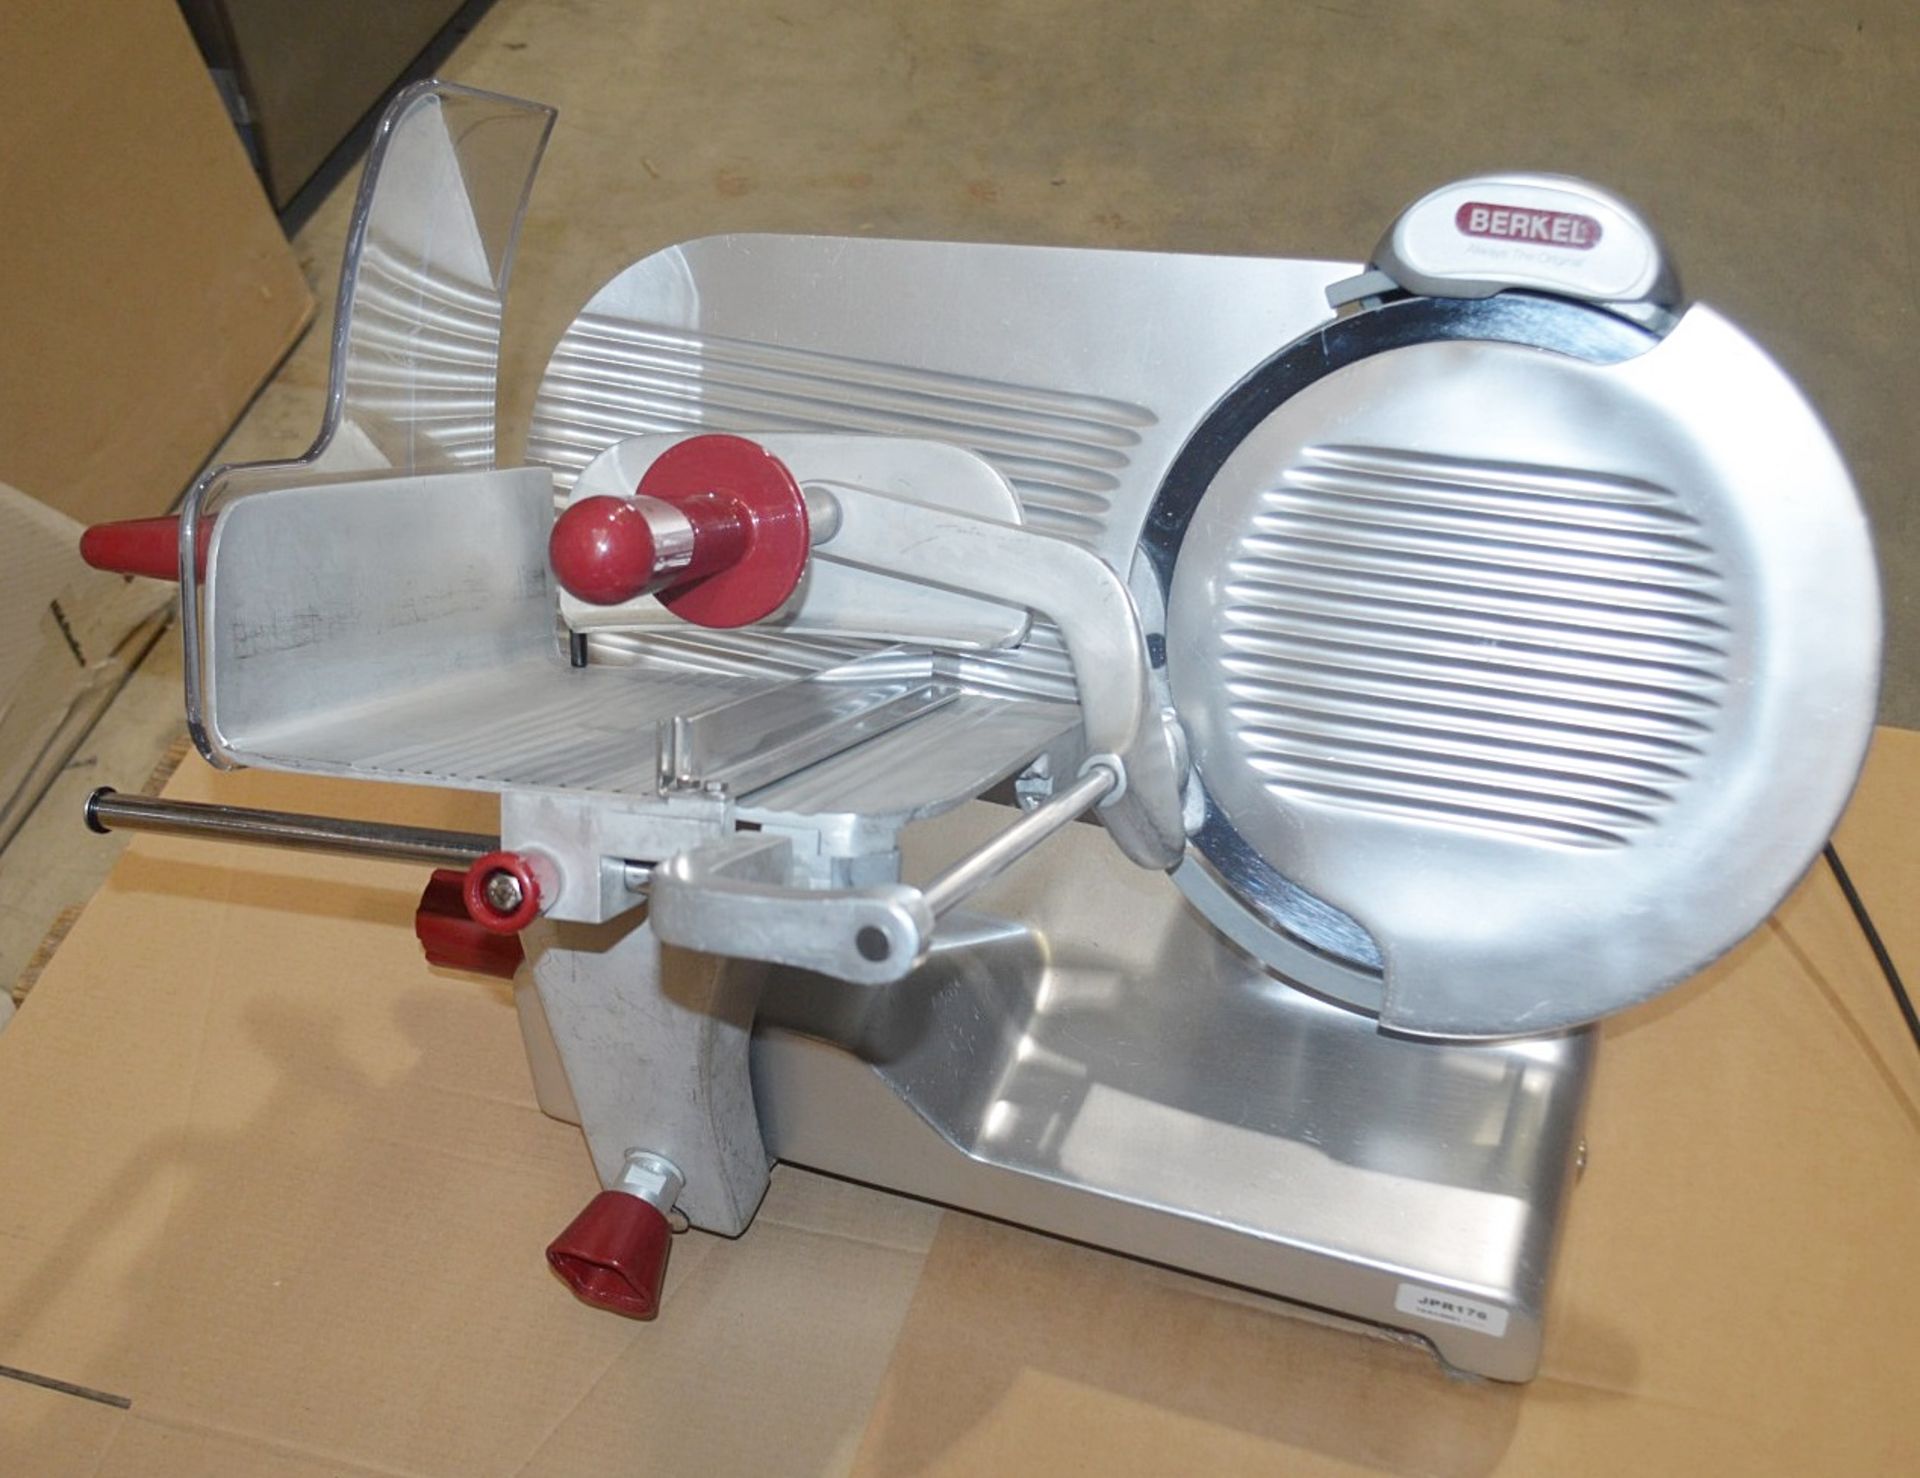 1 x AVERY BERKEL Commercial Meat Slicer In Stainless Steel - Dimensions: H54 x W52 x D42cm - Very